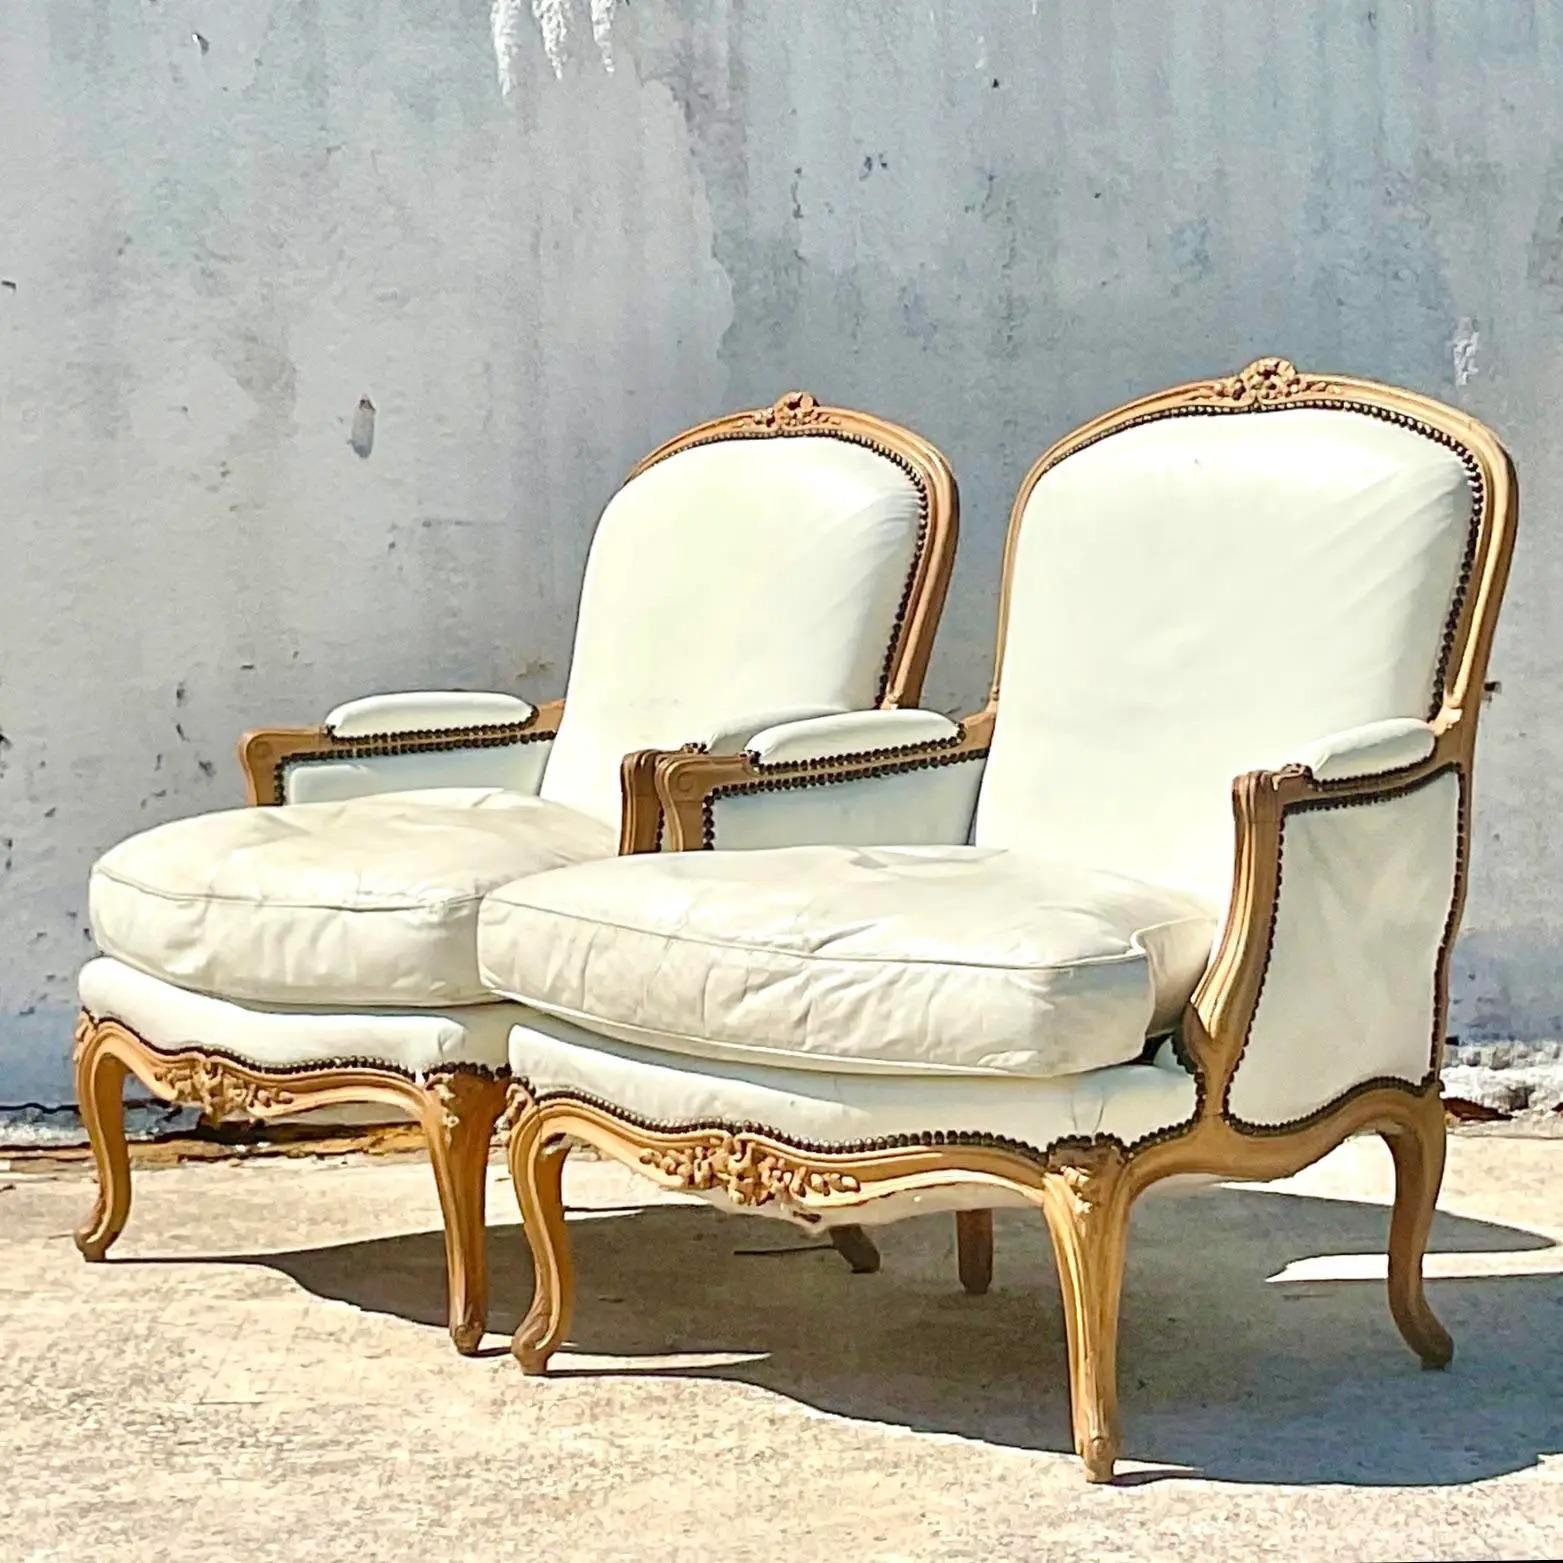 Vintage Boho John Dickinson White Leather Bergere Chairs - a Pair For Sale 2